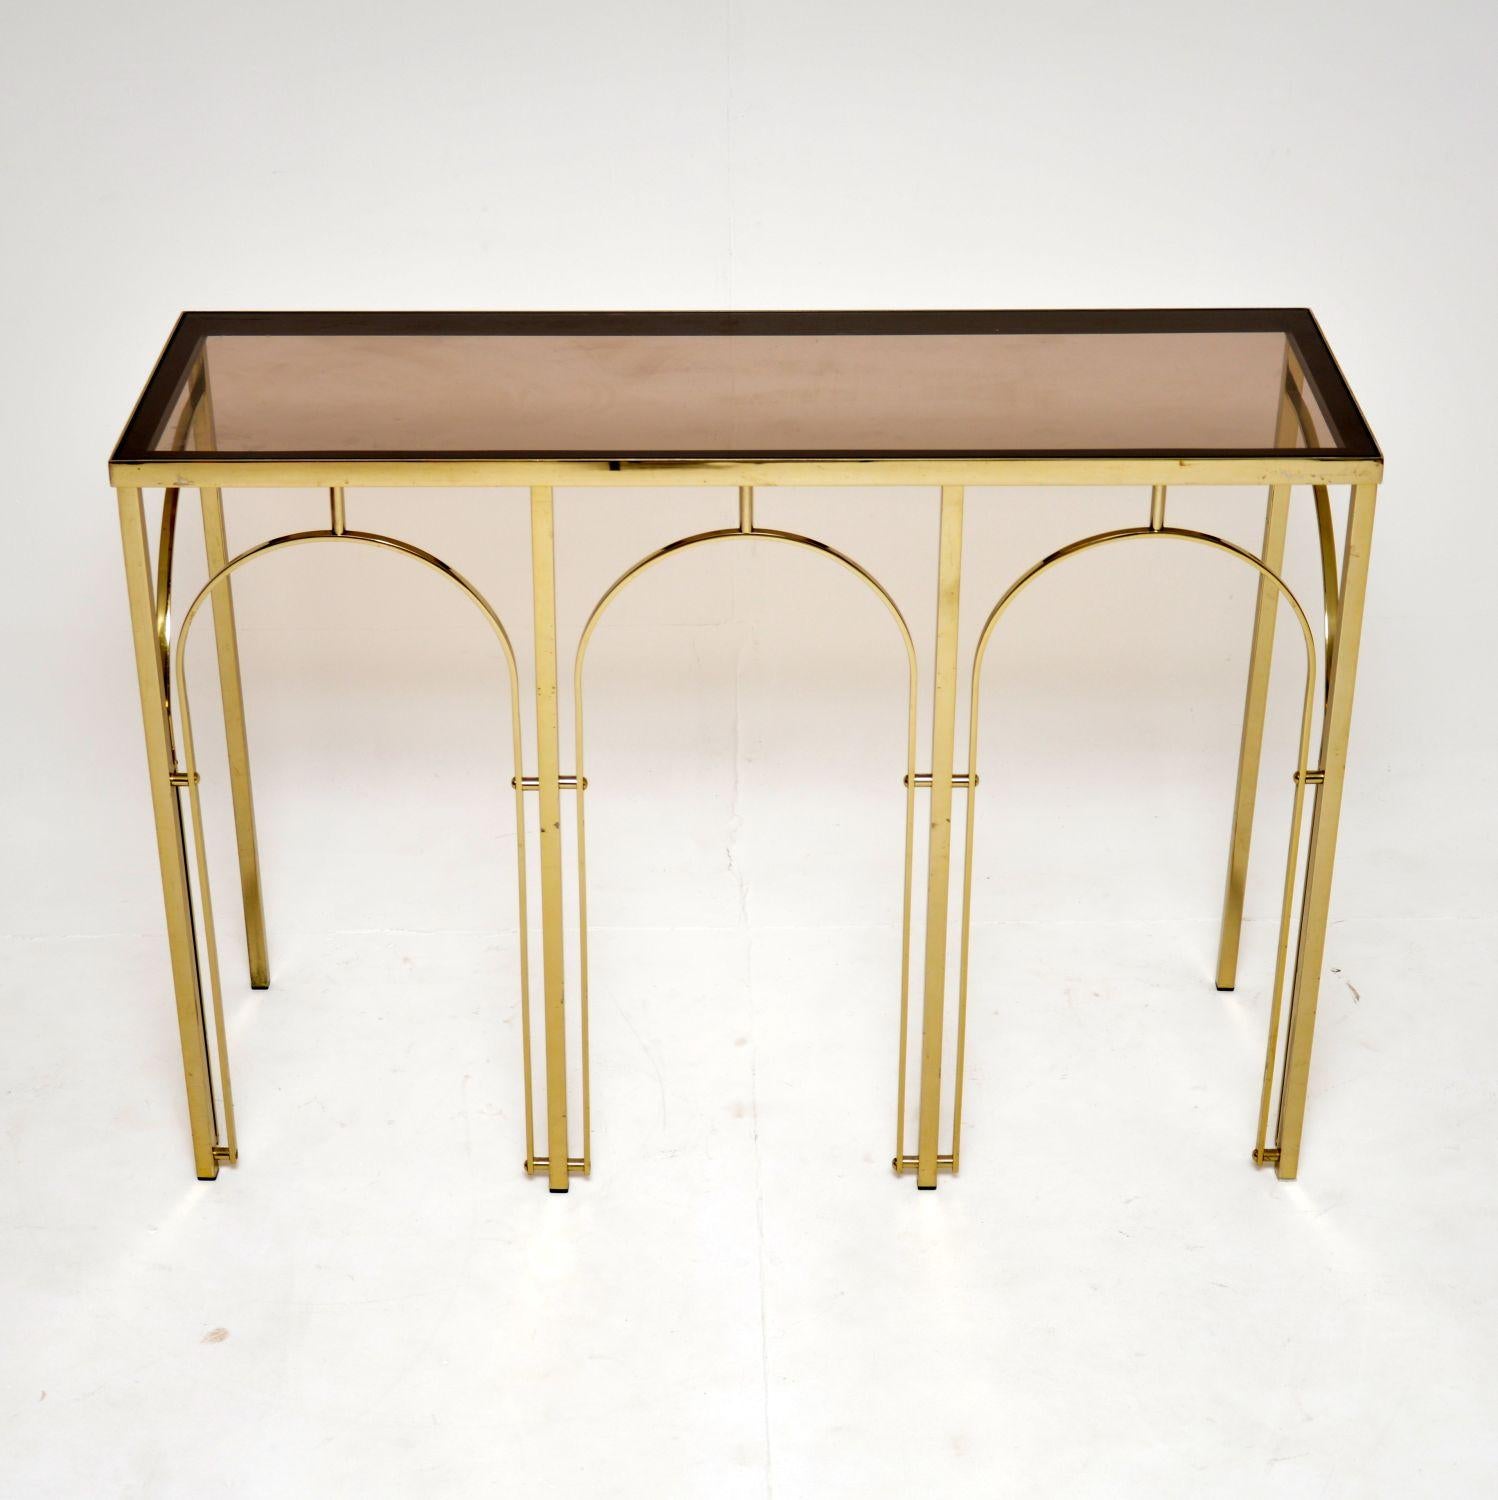 A very smart and stylish 1970’s vintage Italian glass top brass console table.

The quality is excellent, this is a useful size with a very elegant design. The inset glass top is slightly tinted and is removable.

The overall condition is excellent